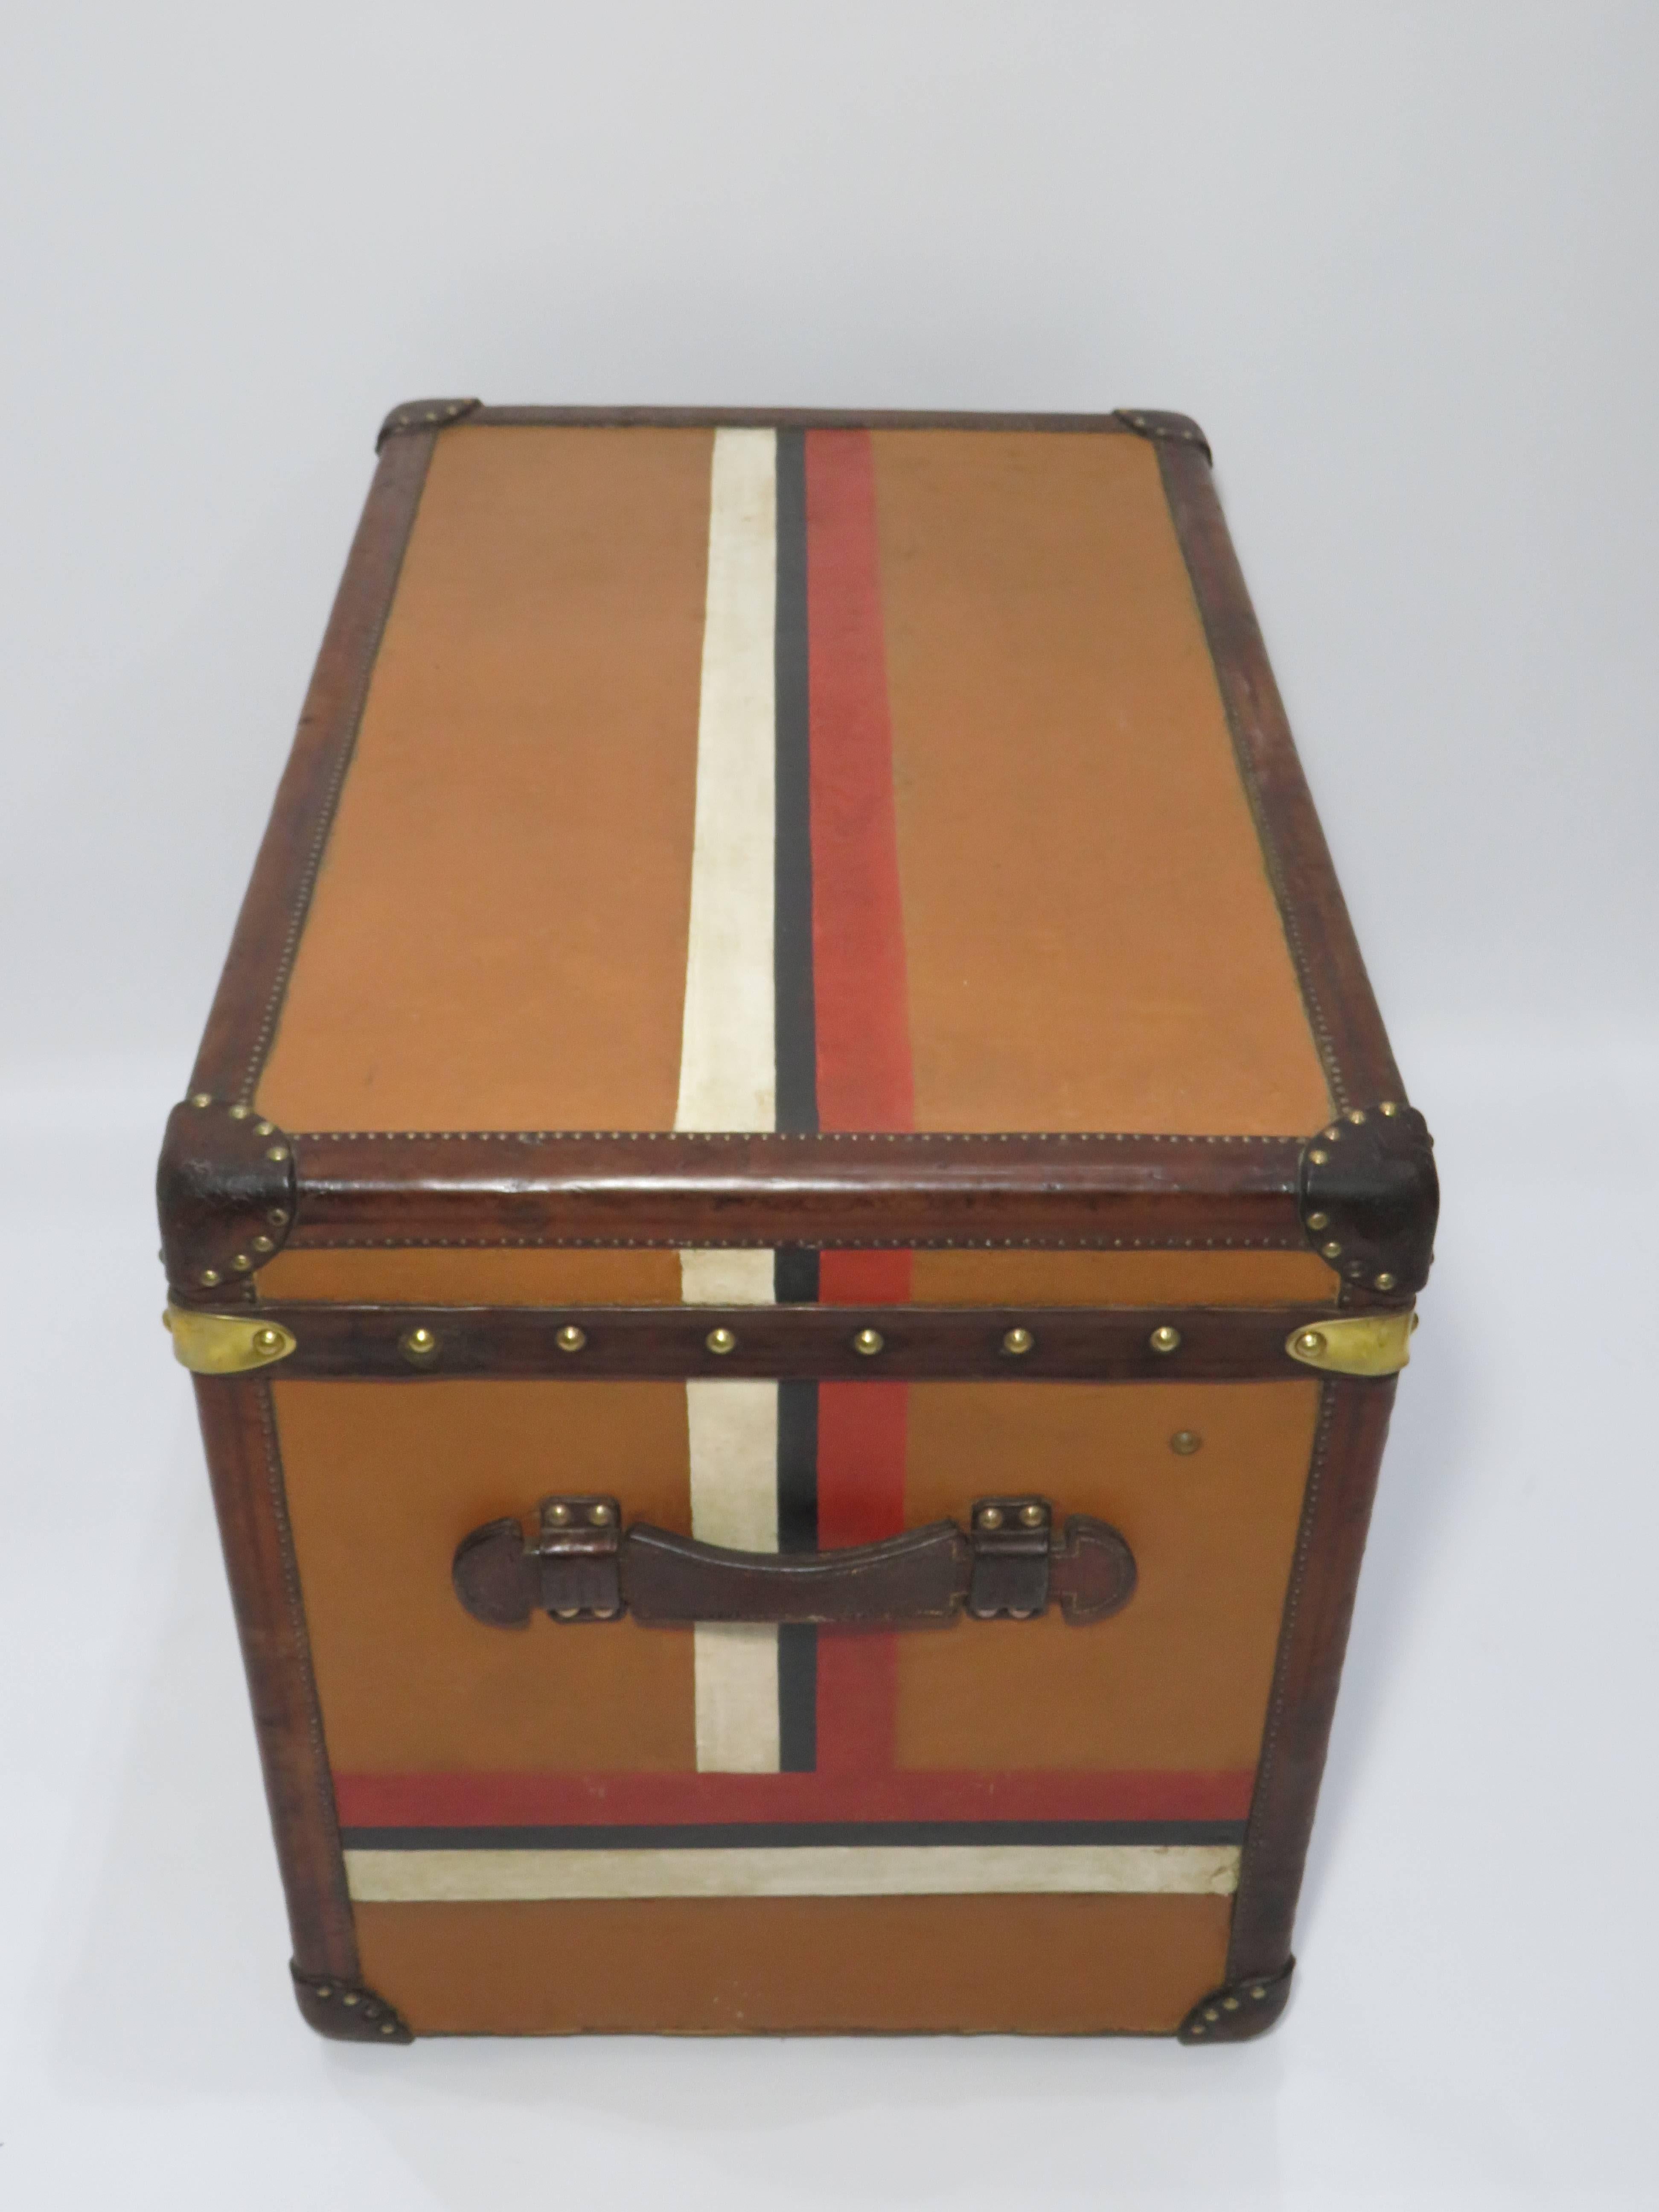 For sale a 1920s Louis Vuitton Vuittonite canvas trunk in very good condition with leather bounding, brass hardware and relined interior.
 